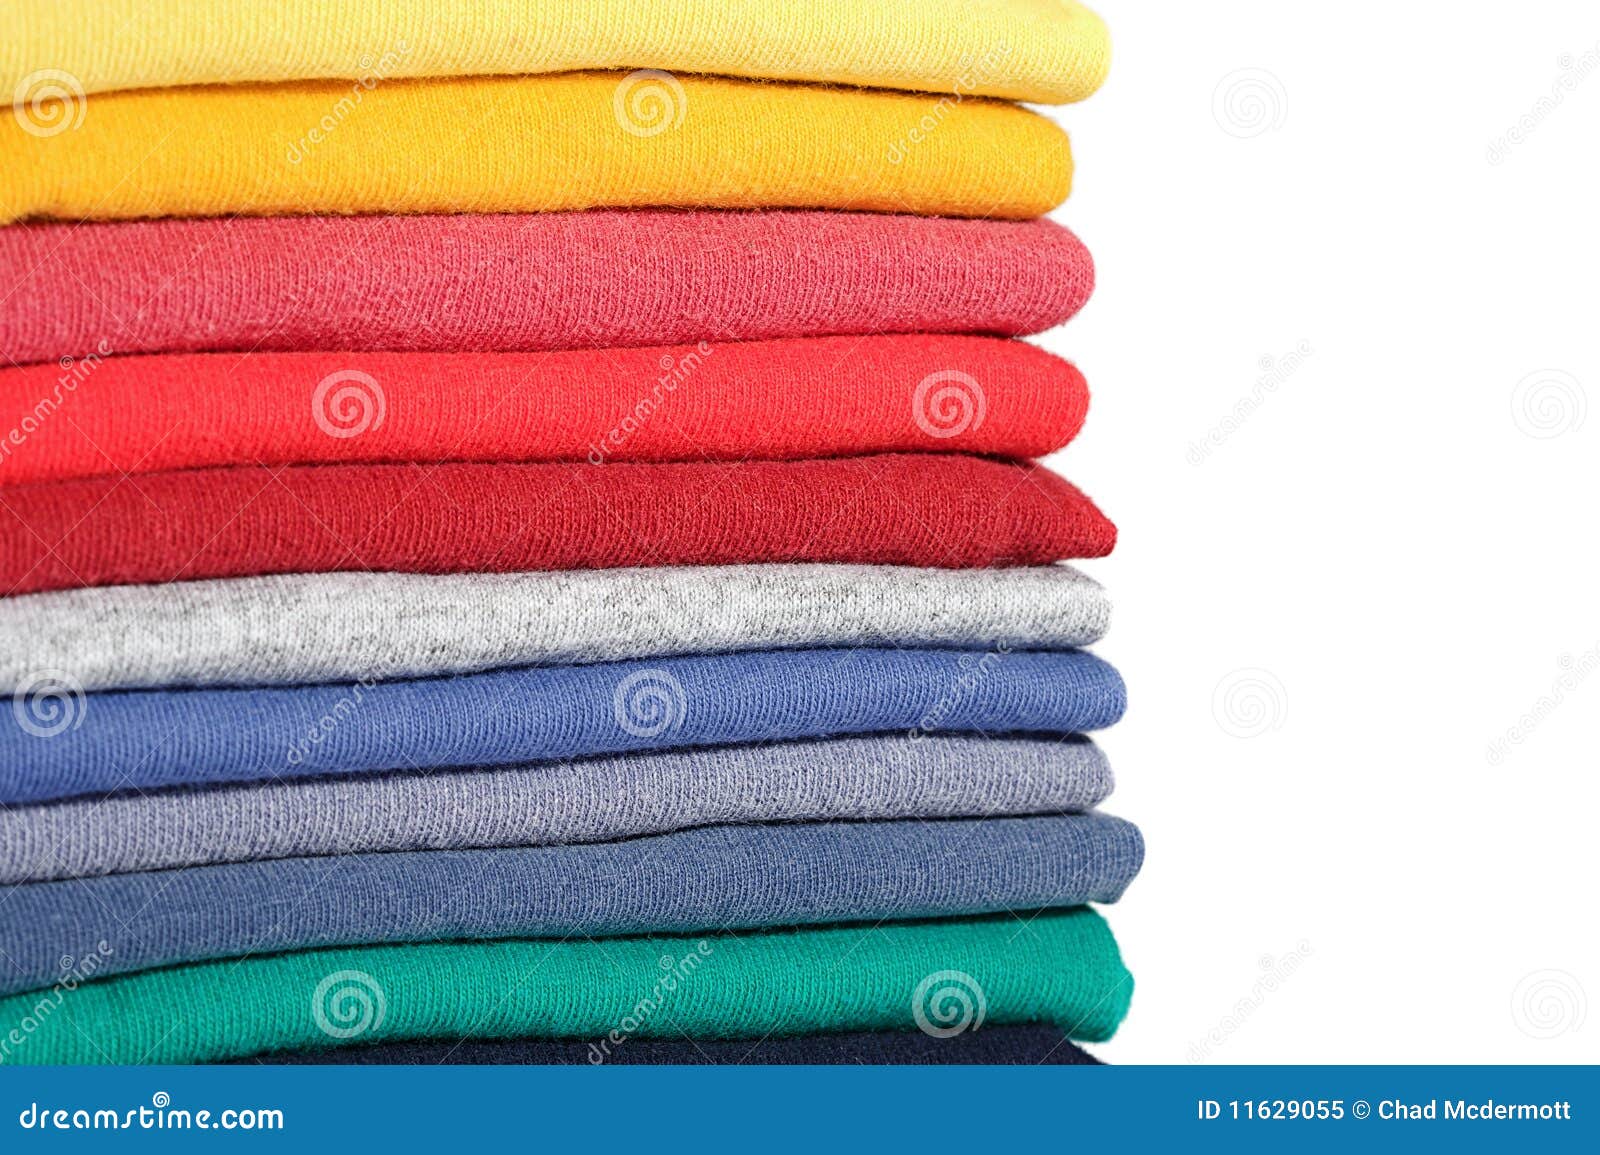 Clothes Stack stock image. Image of clothe, pile, cotton - 11629055